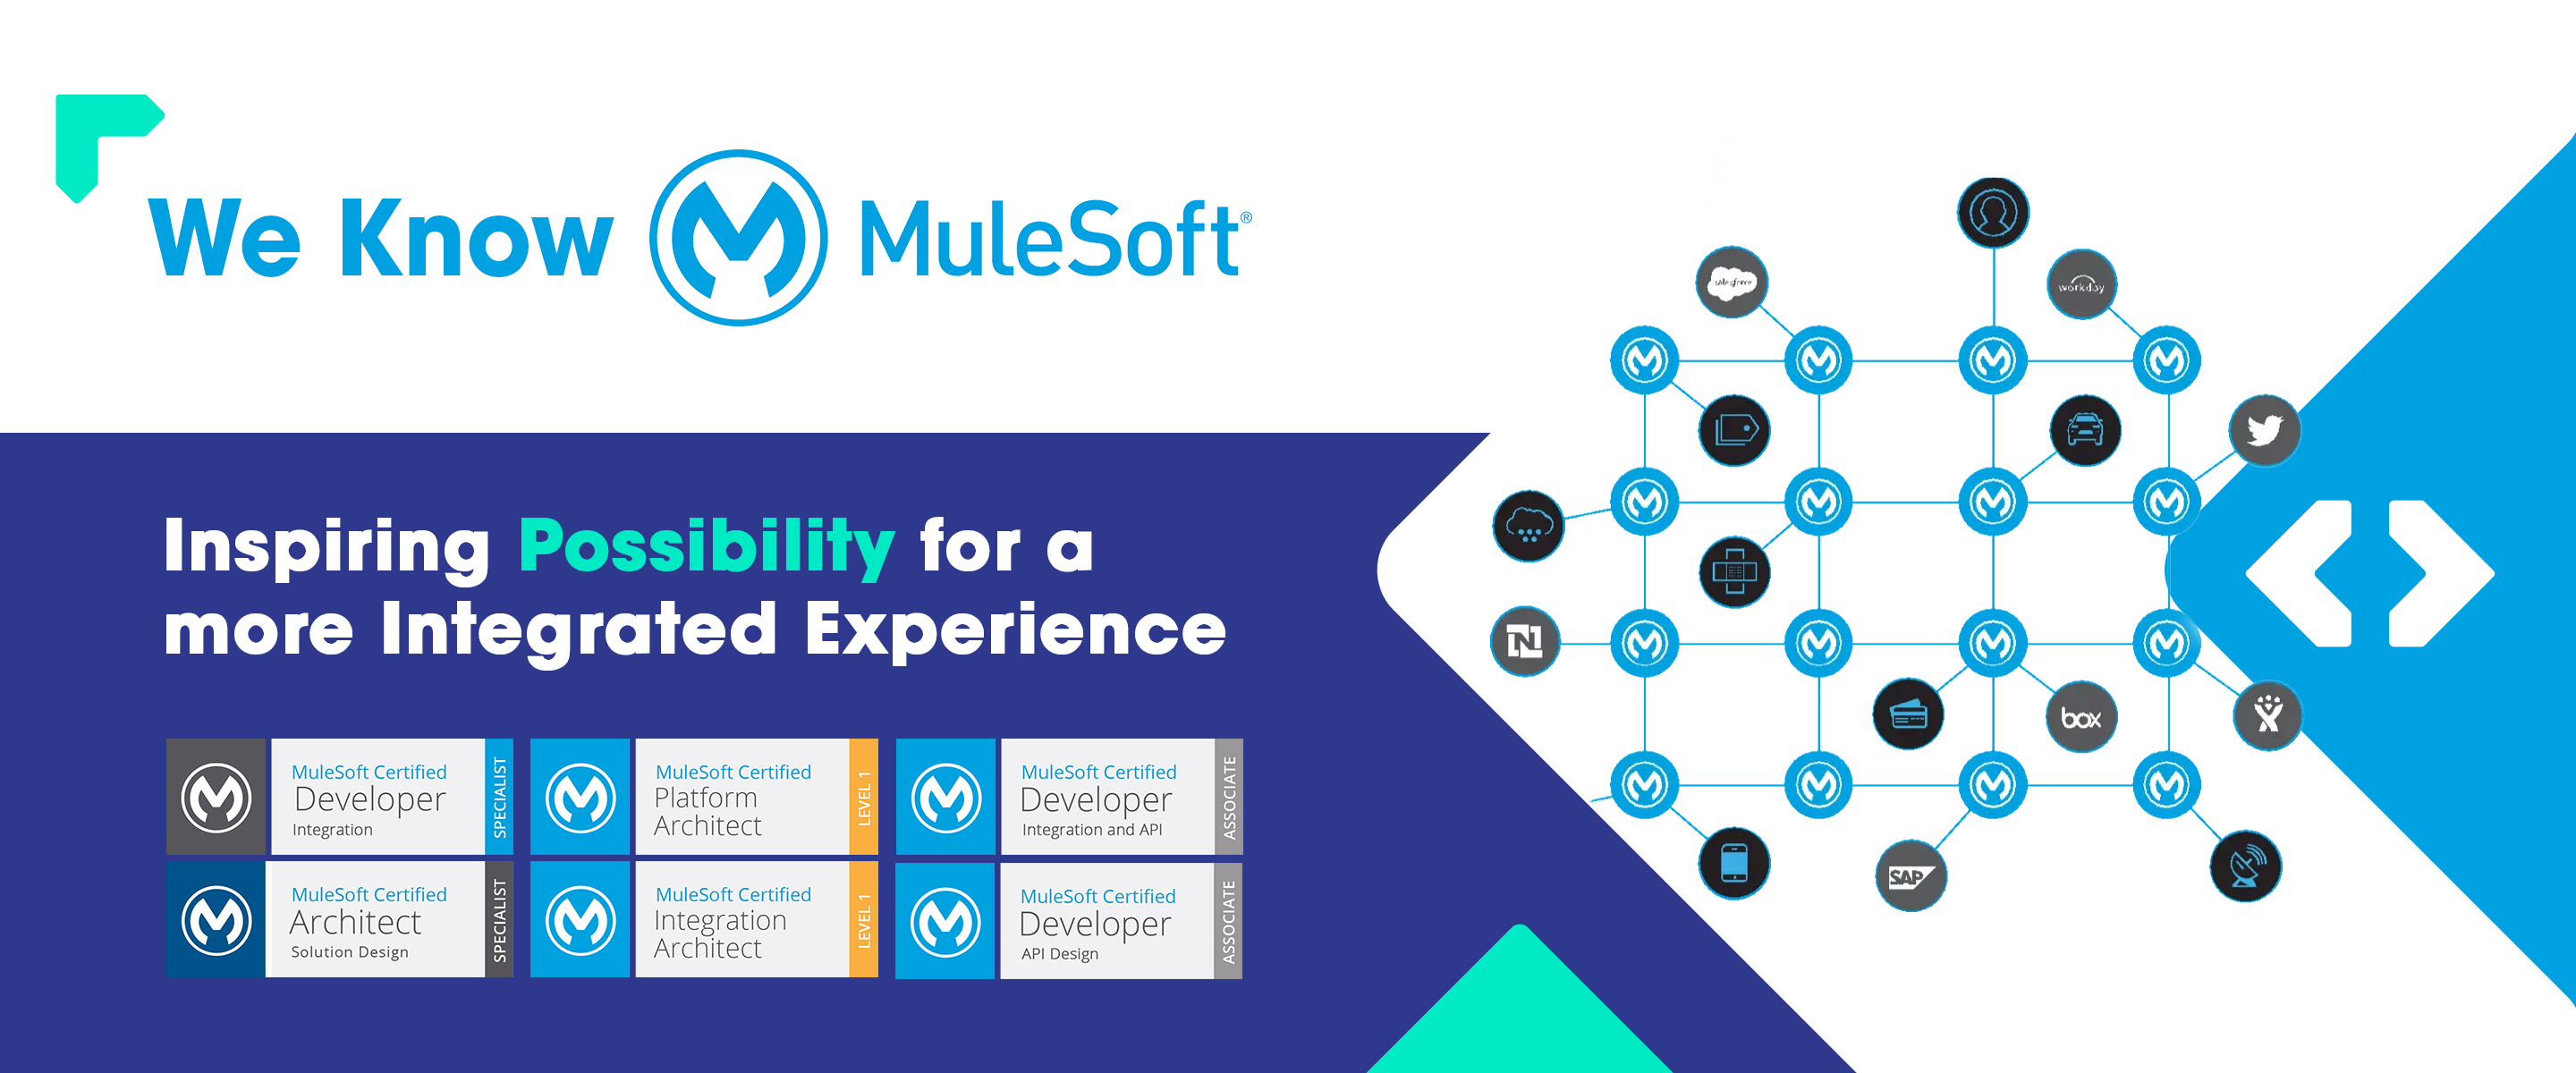 mulesoft consultants, mulesoft consulting